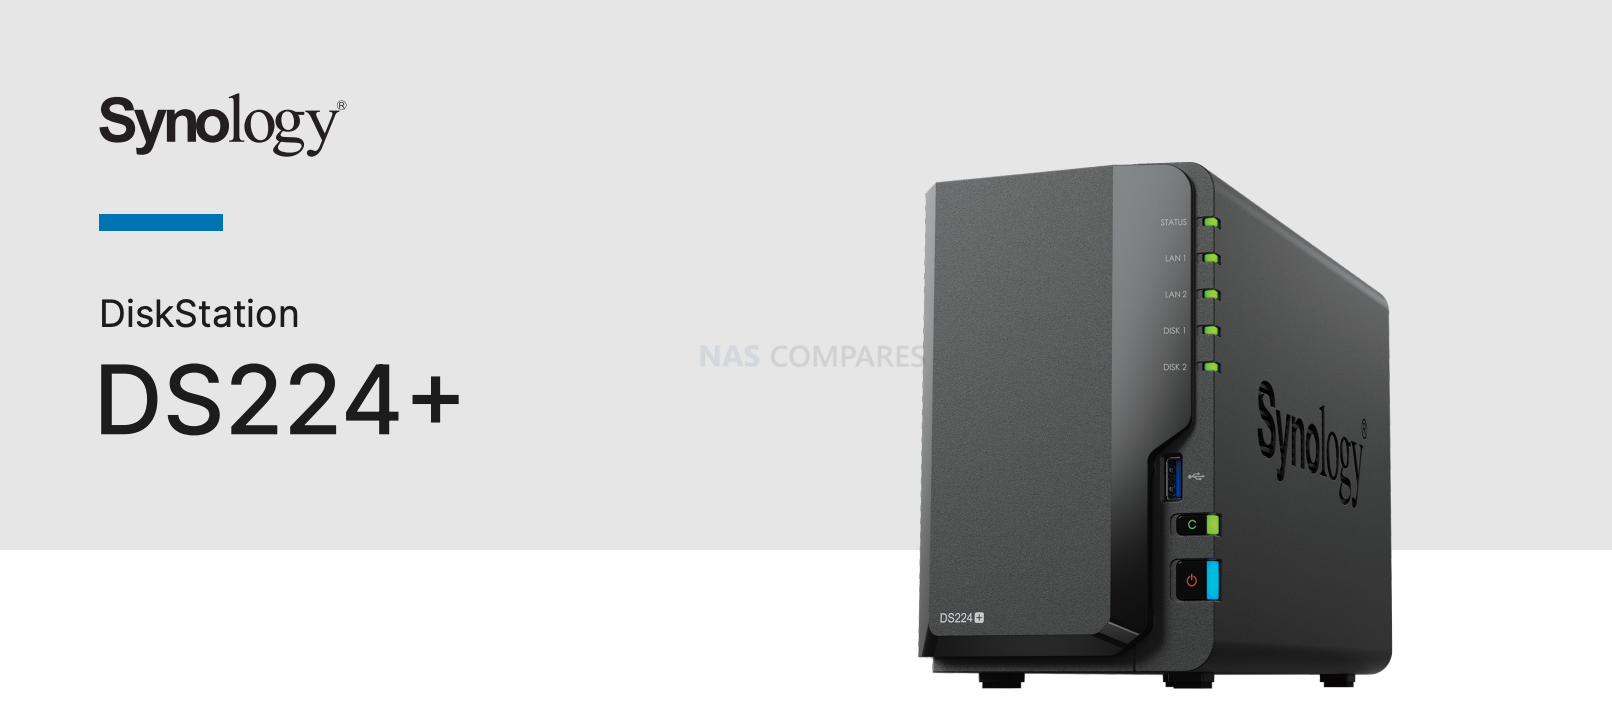 DS224+ DiskStation - Compact and Expandable 2-Bay NAS - Global Village  Space